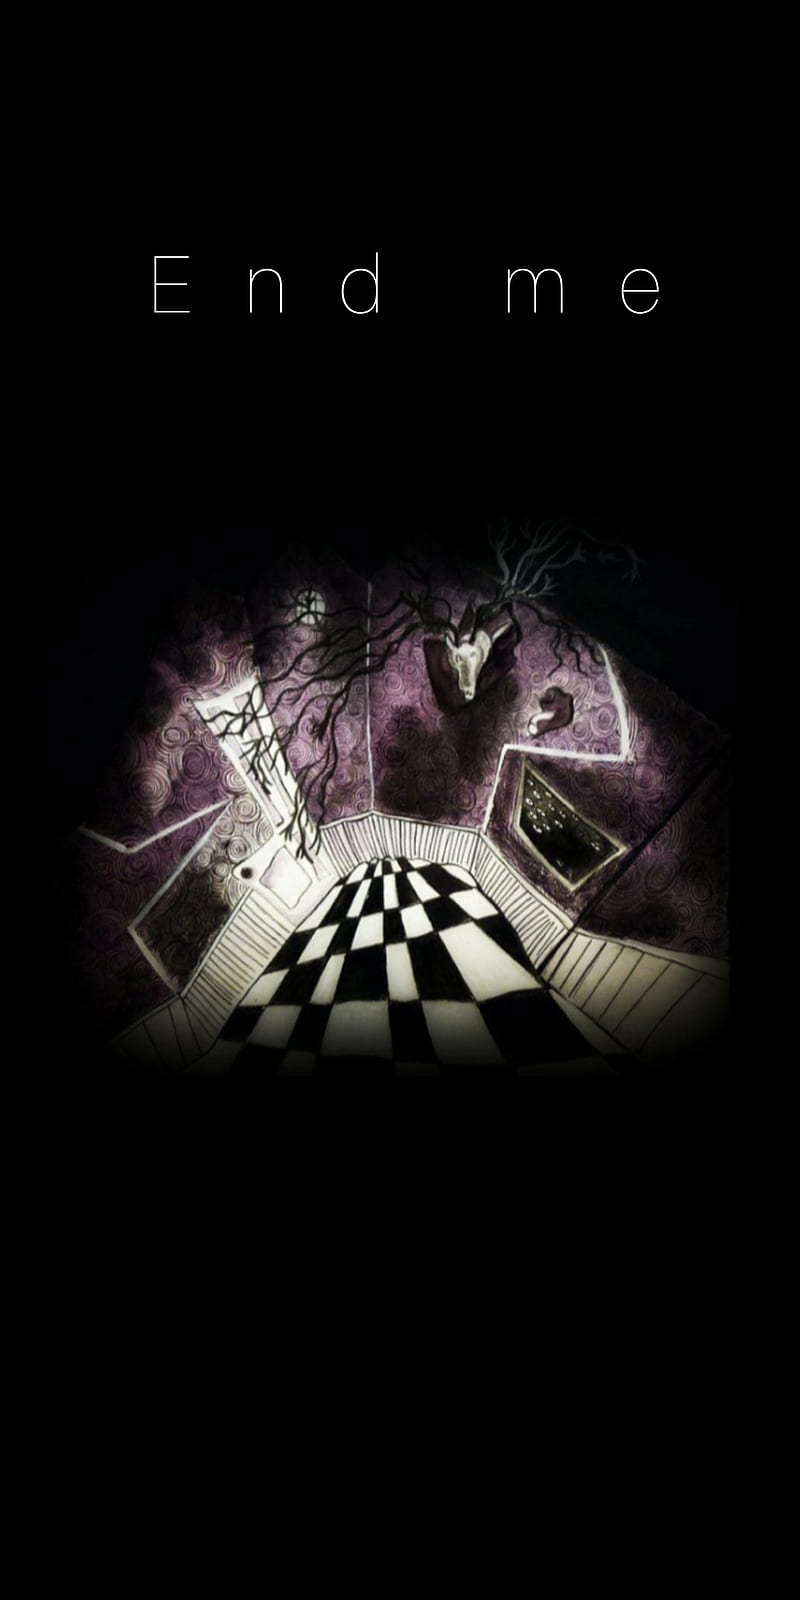 Creepy Wallpapers APK for Android Download